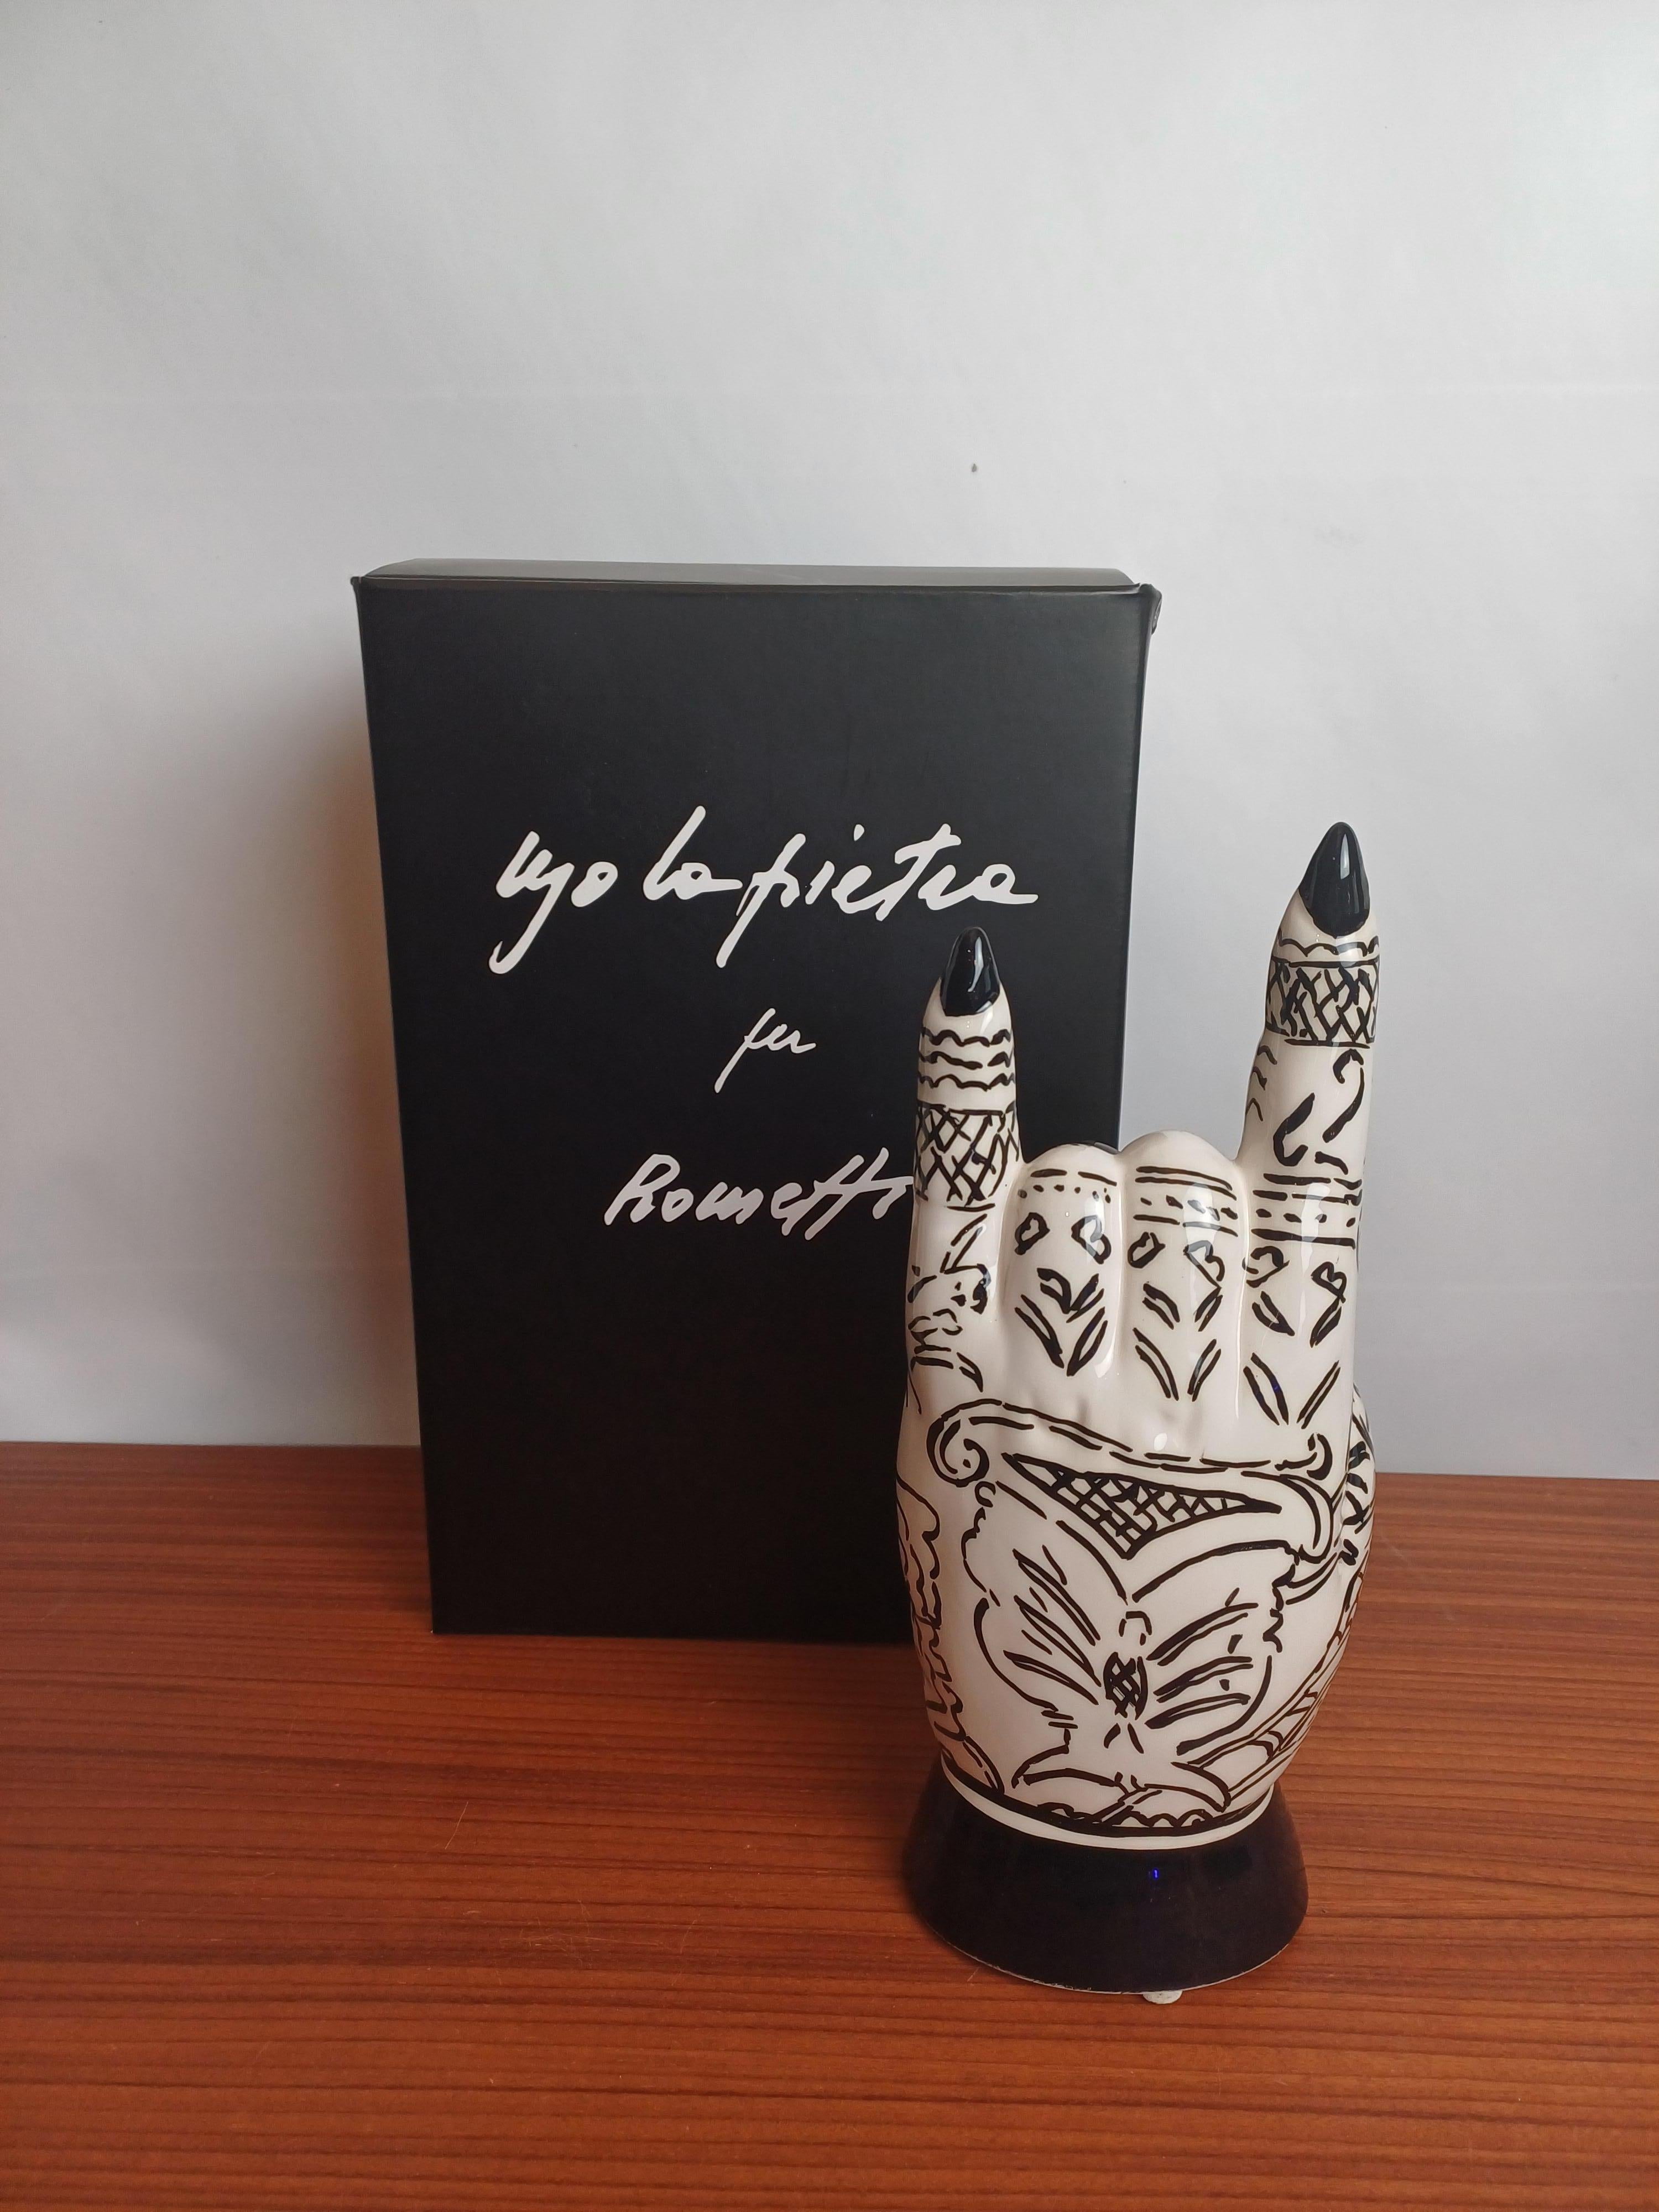 Ceramic hand designed by Ugo La Pietra in 2018 and produced by Rometti ceramiche.
Ceramic hand with ironic and nonconformist tatoo. The history of Ceramiche Rometti begins in the late years,  after ninety years of operation still retains a unique